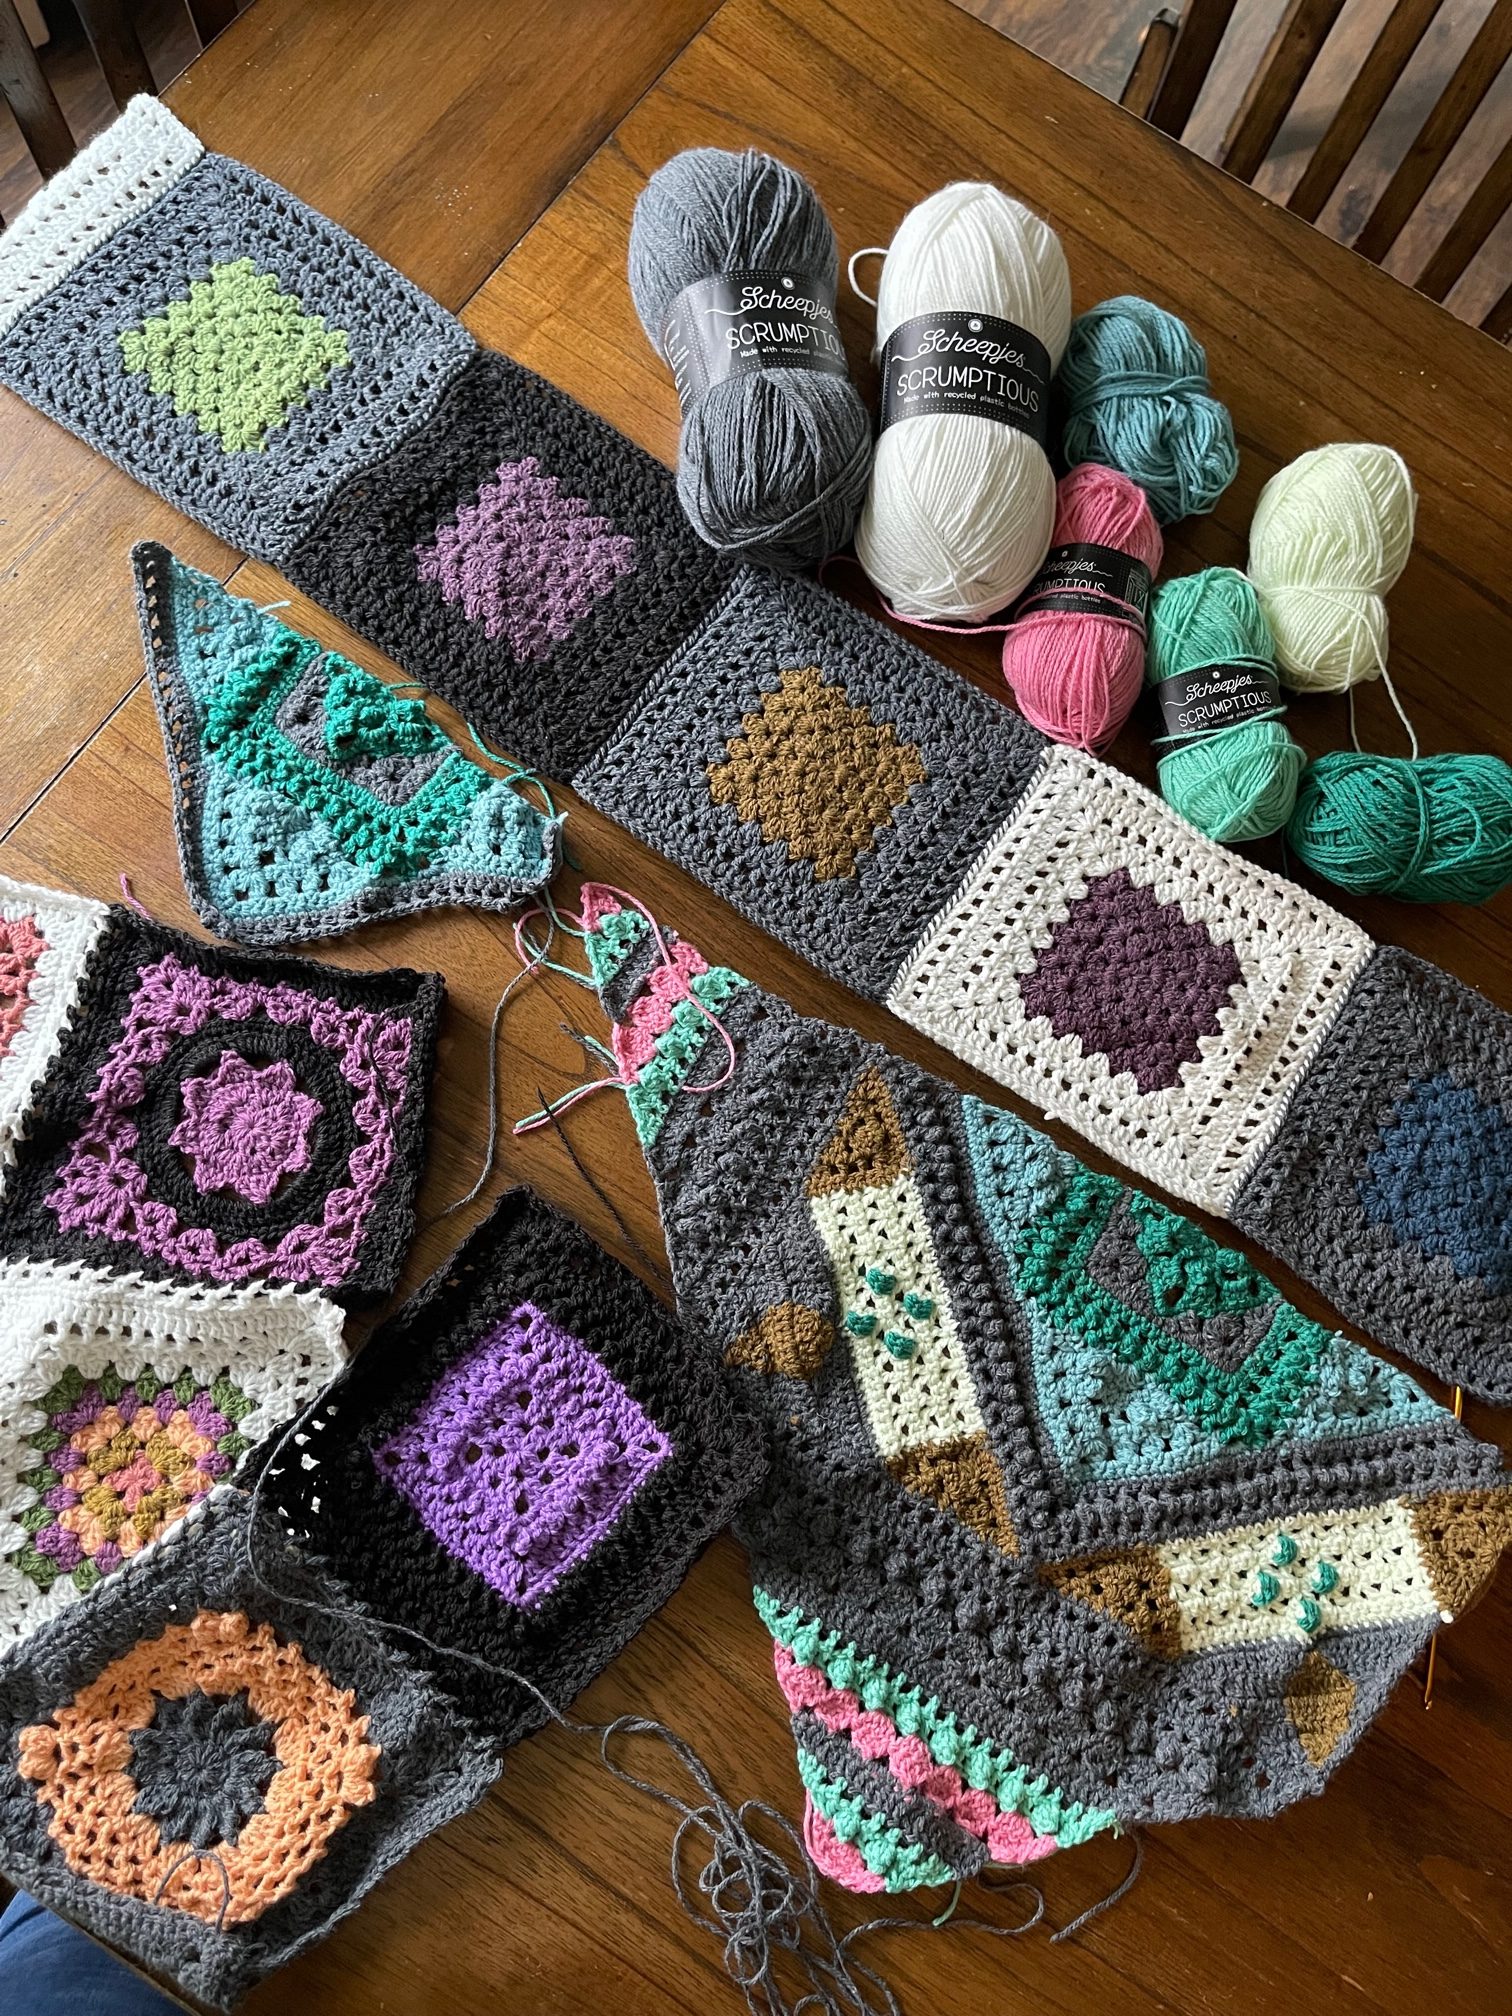 How to Block Crochet (And Why You Should!) - Sarah Maker